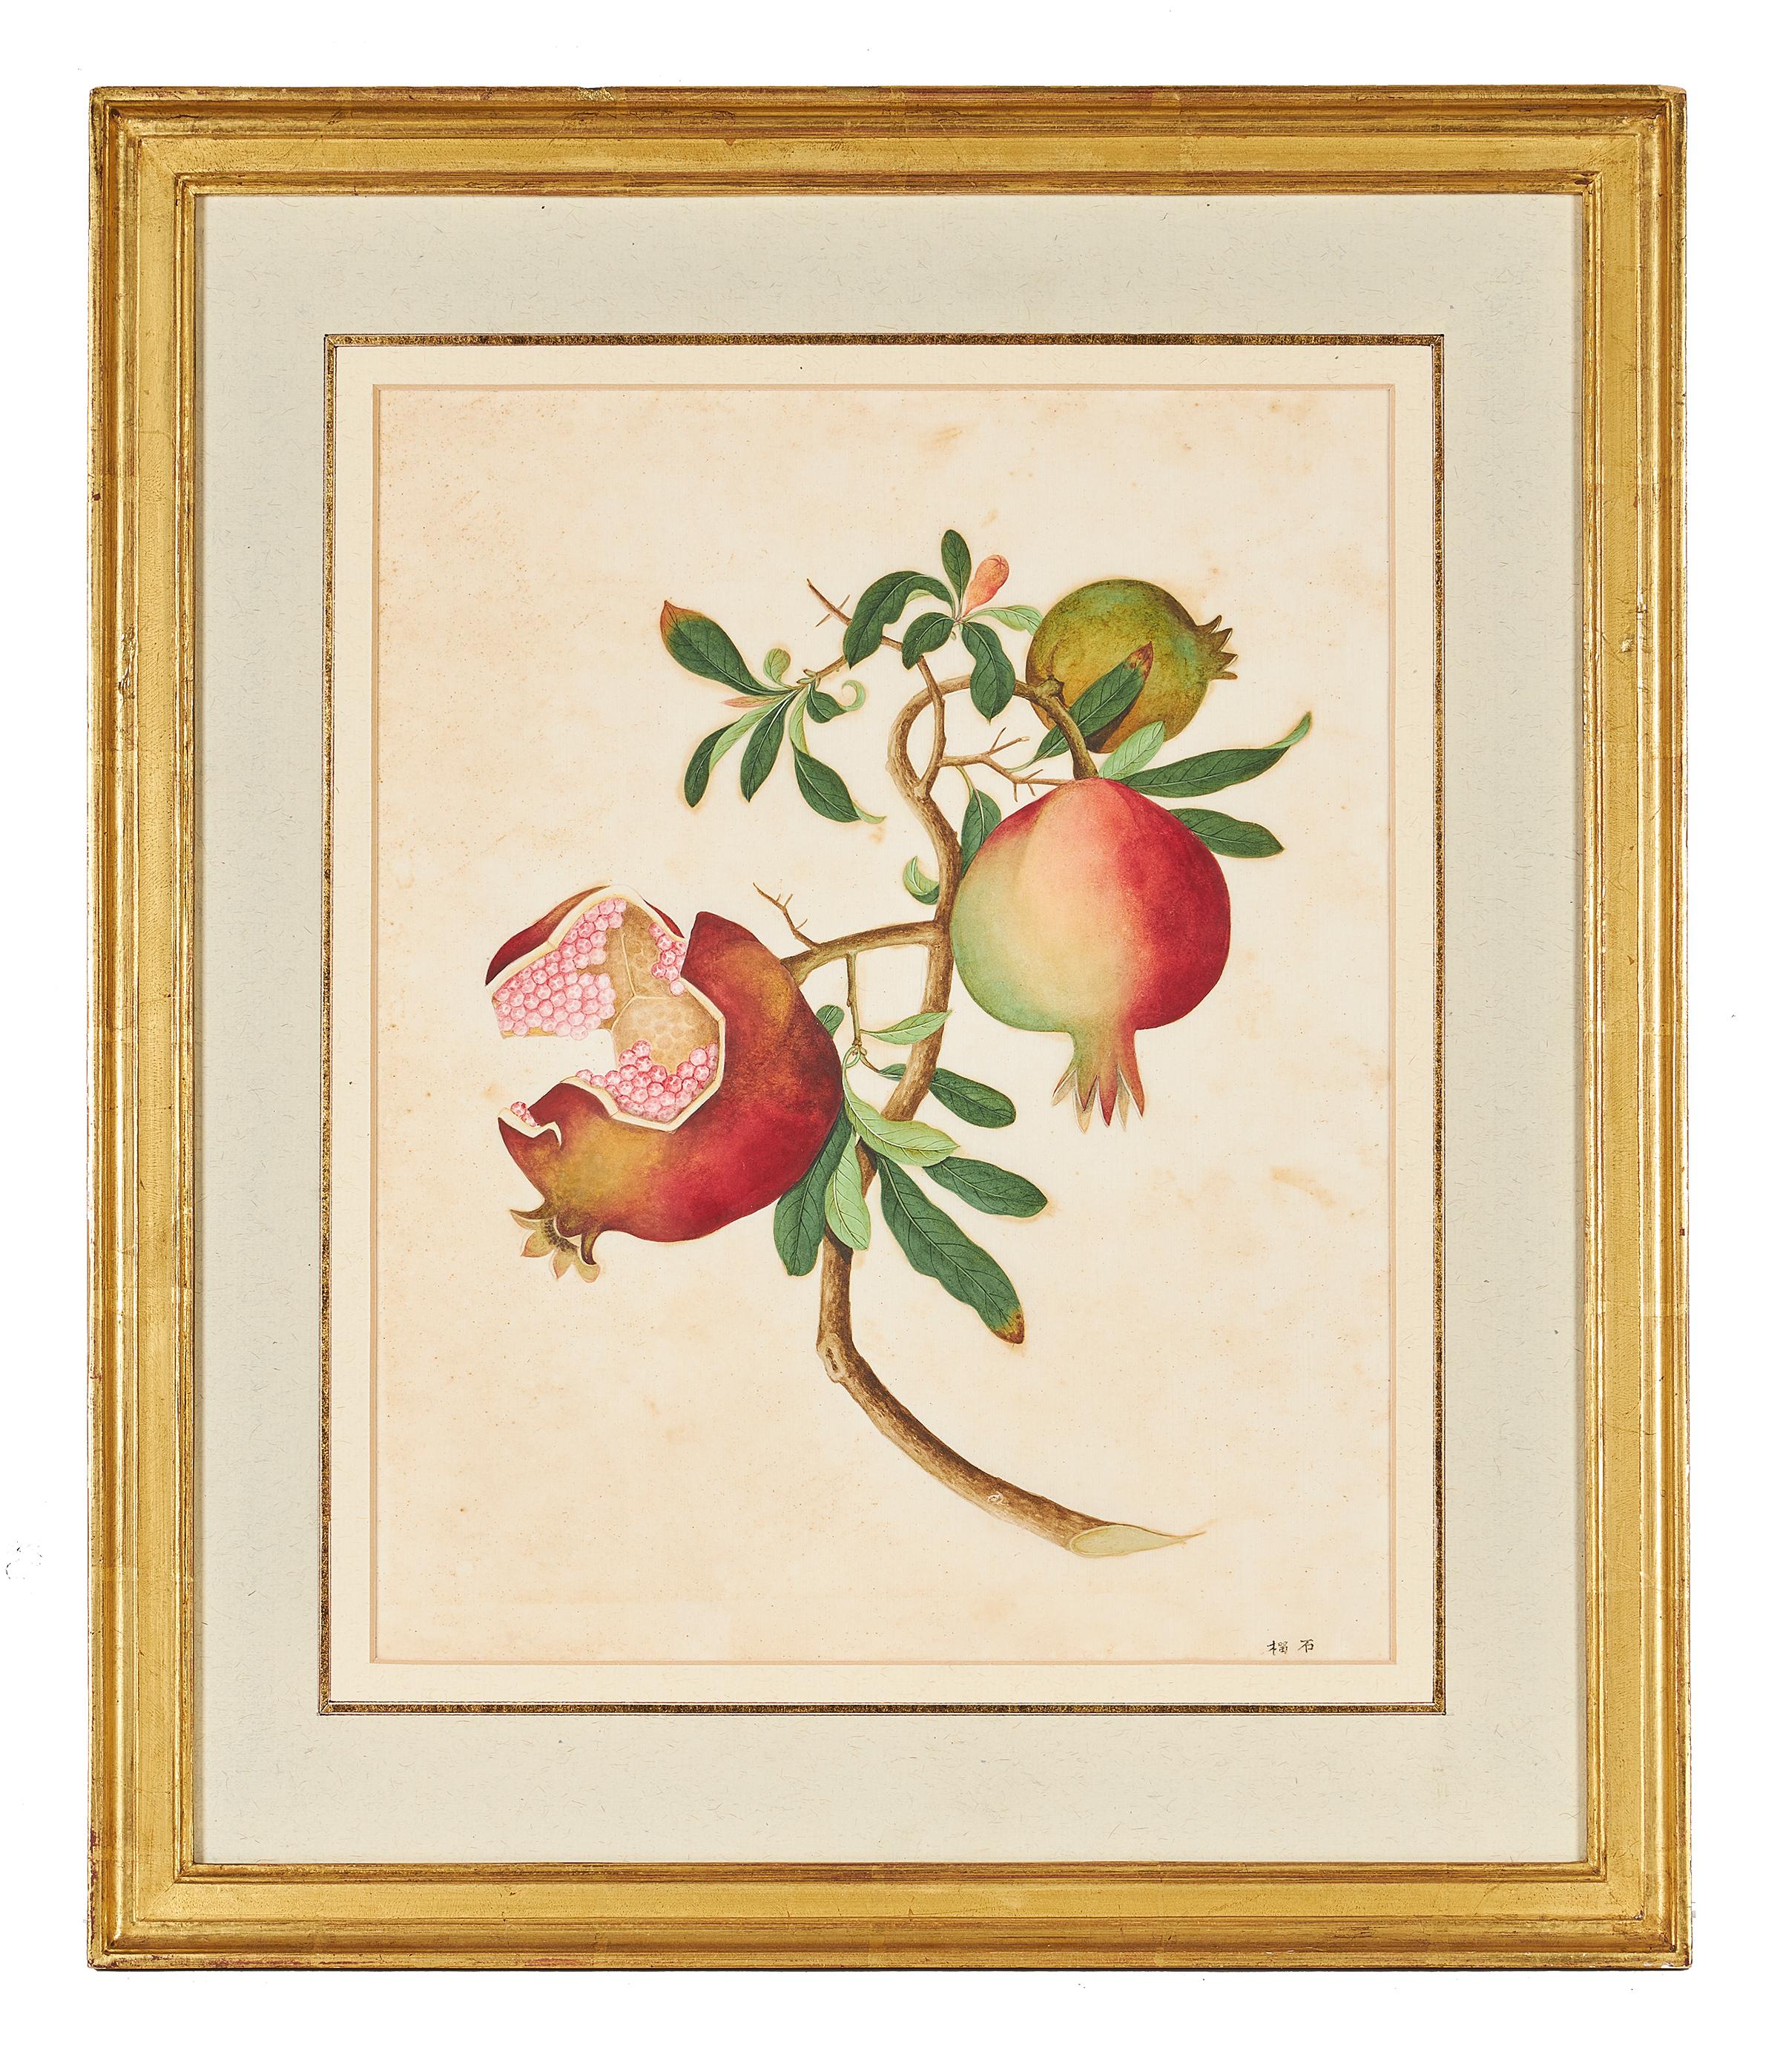 An 18th century Chinese School watercolor study of a pomegranate, circa 1790-1800, watercolor on paper, the lower right hand corner signed in hanzi, framed; from the Collection of Sir Joseph Banks, 1st Baronet, GCB, PRS.